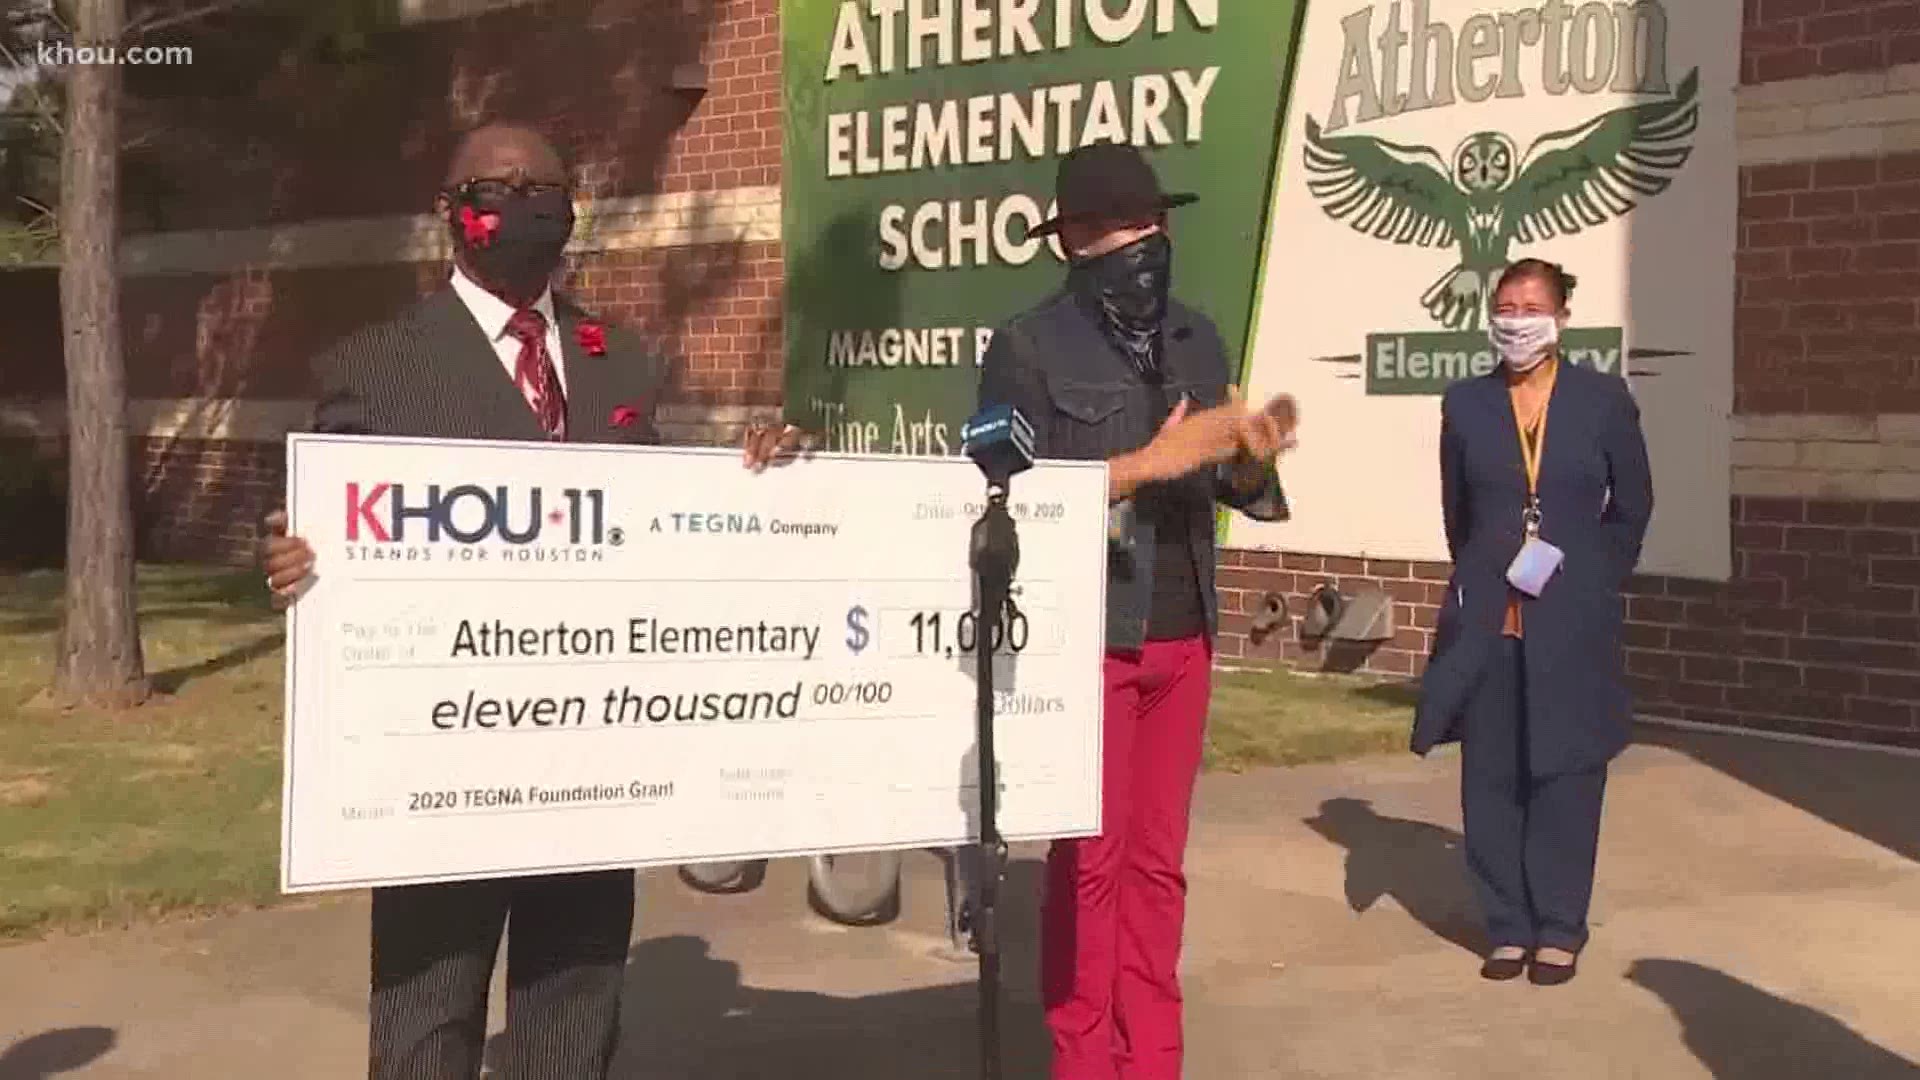 On behalf of the TEGNA Foundation, KHOU 11 proudly presented Atherton Principal Dr. Albert Lemons with an $11,000 check for the school's staff, students and teachers